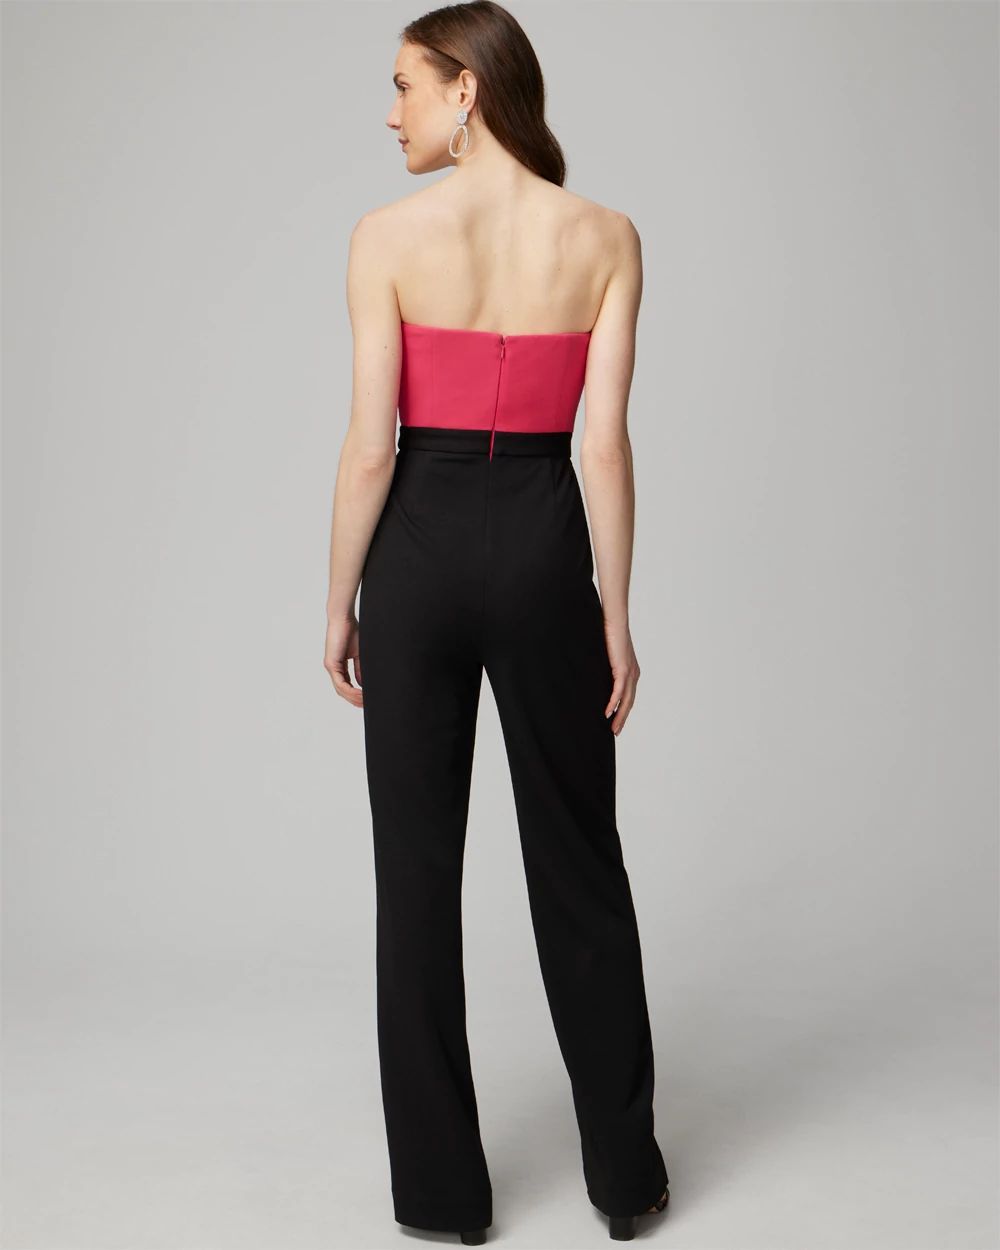 Petite Strapless Colorblock Jumpsuit click to view larger image.